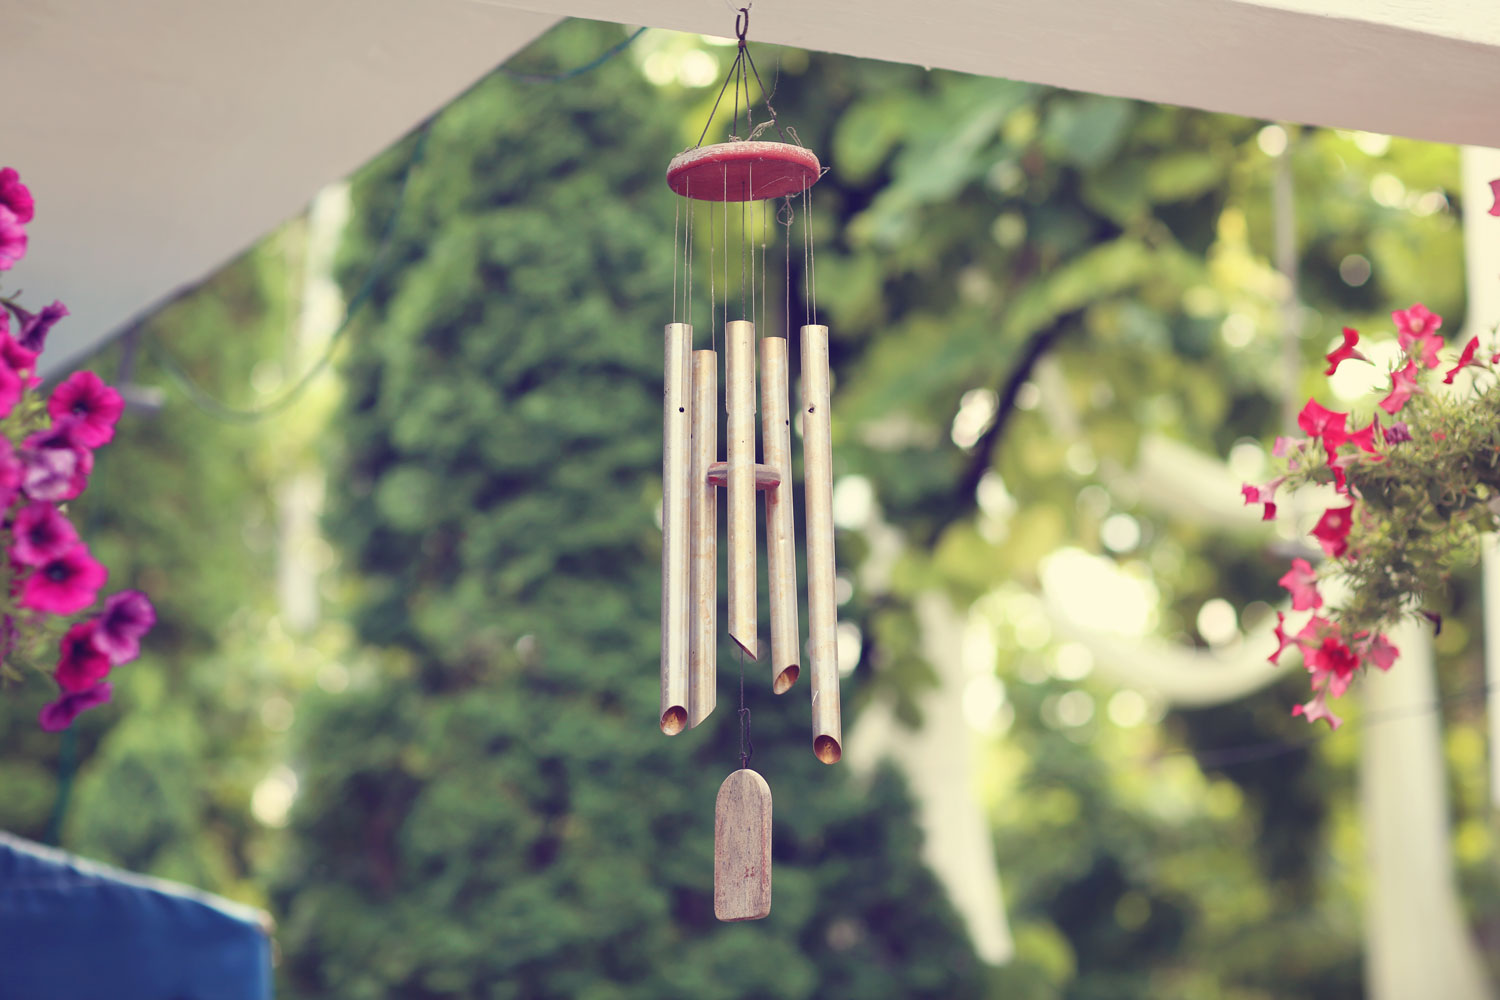 Wind chimes hanged outside the garden